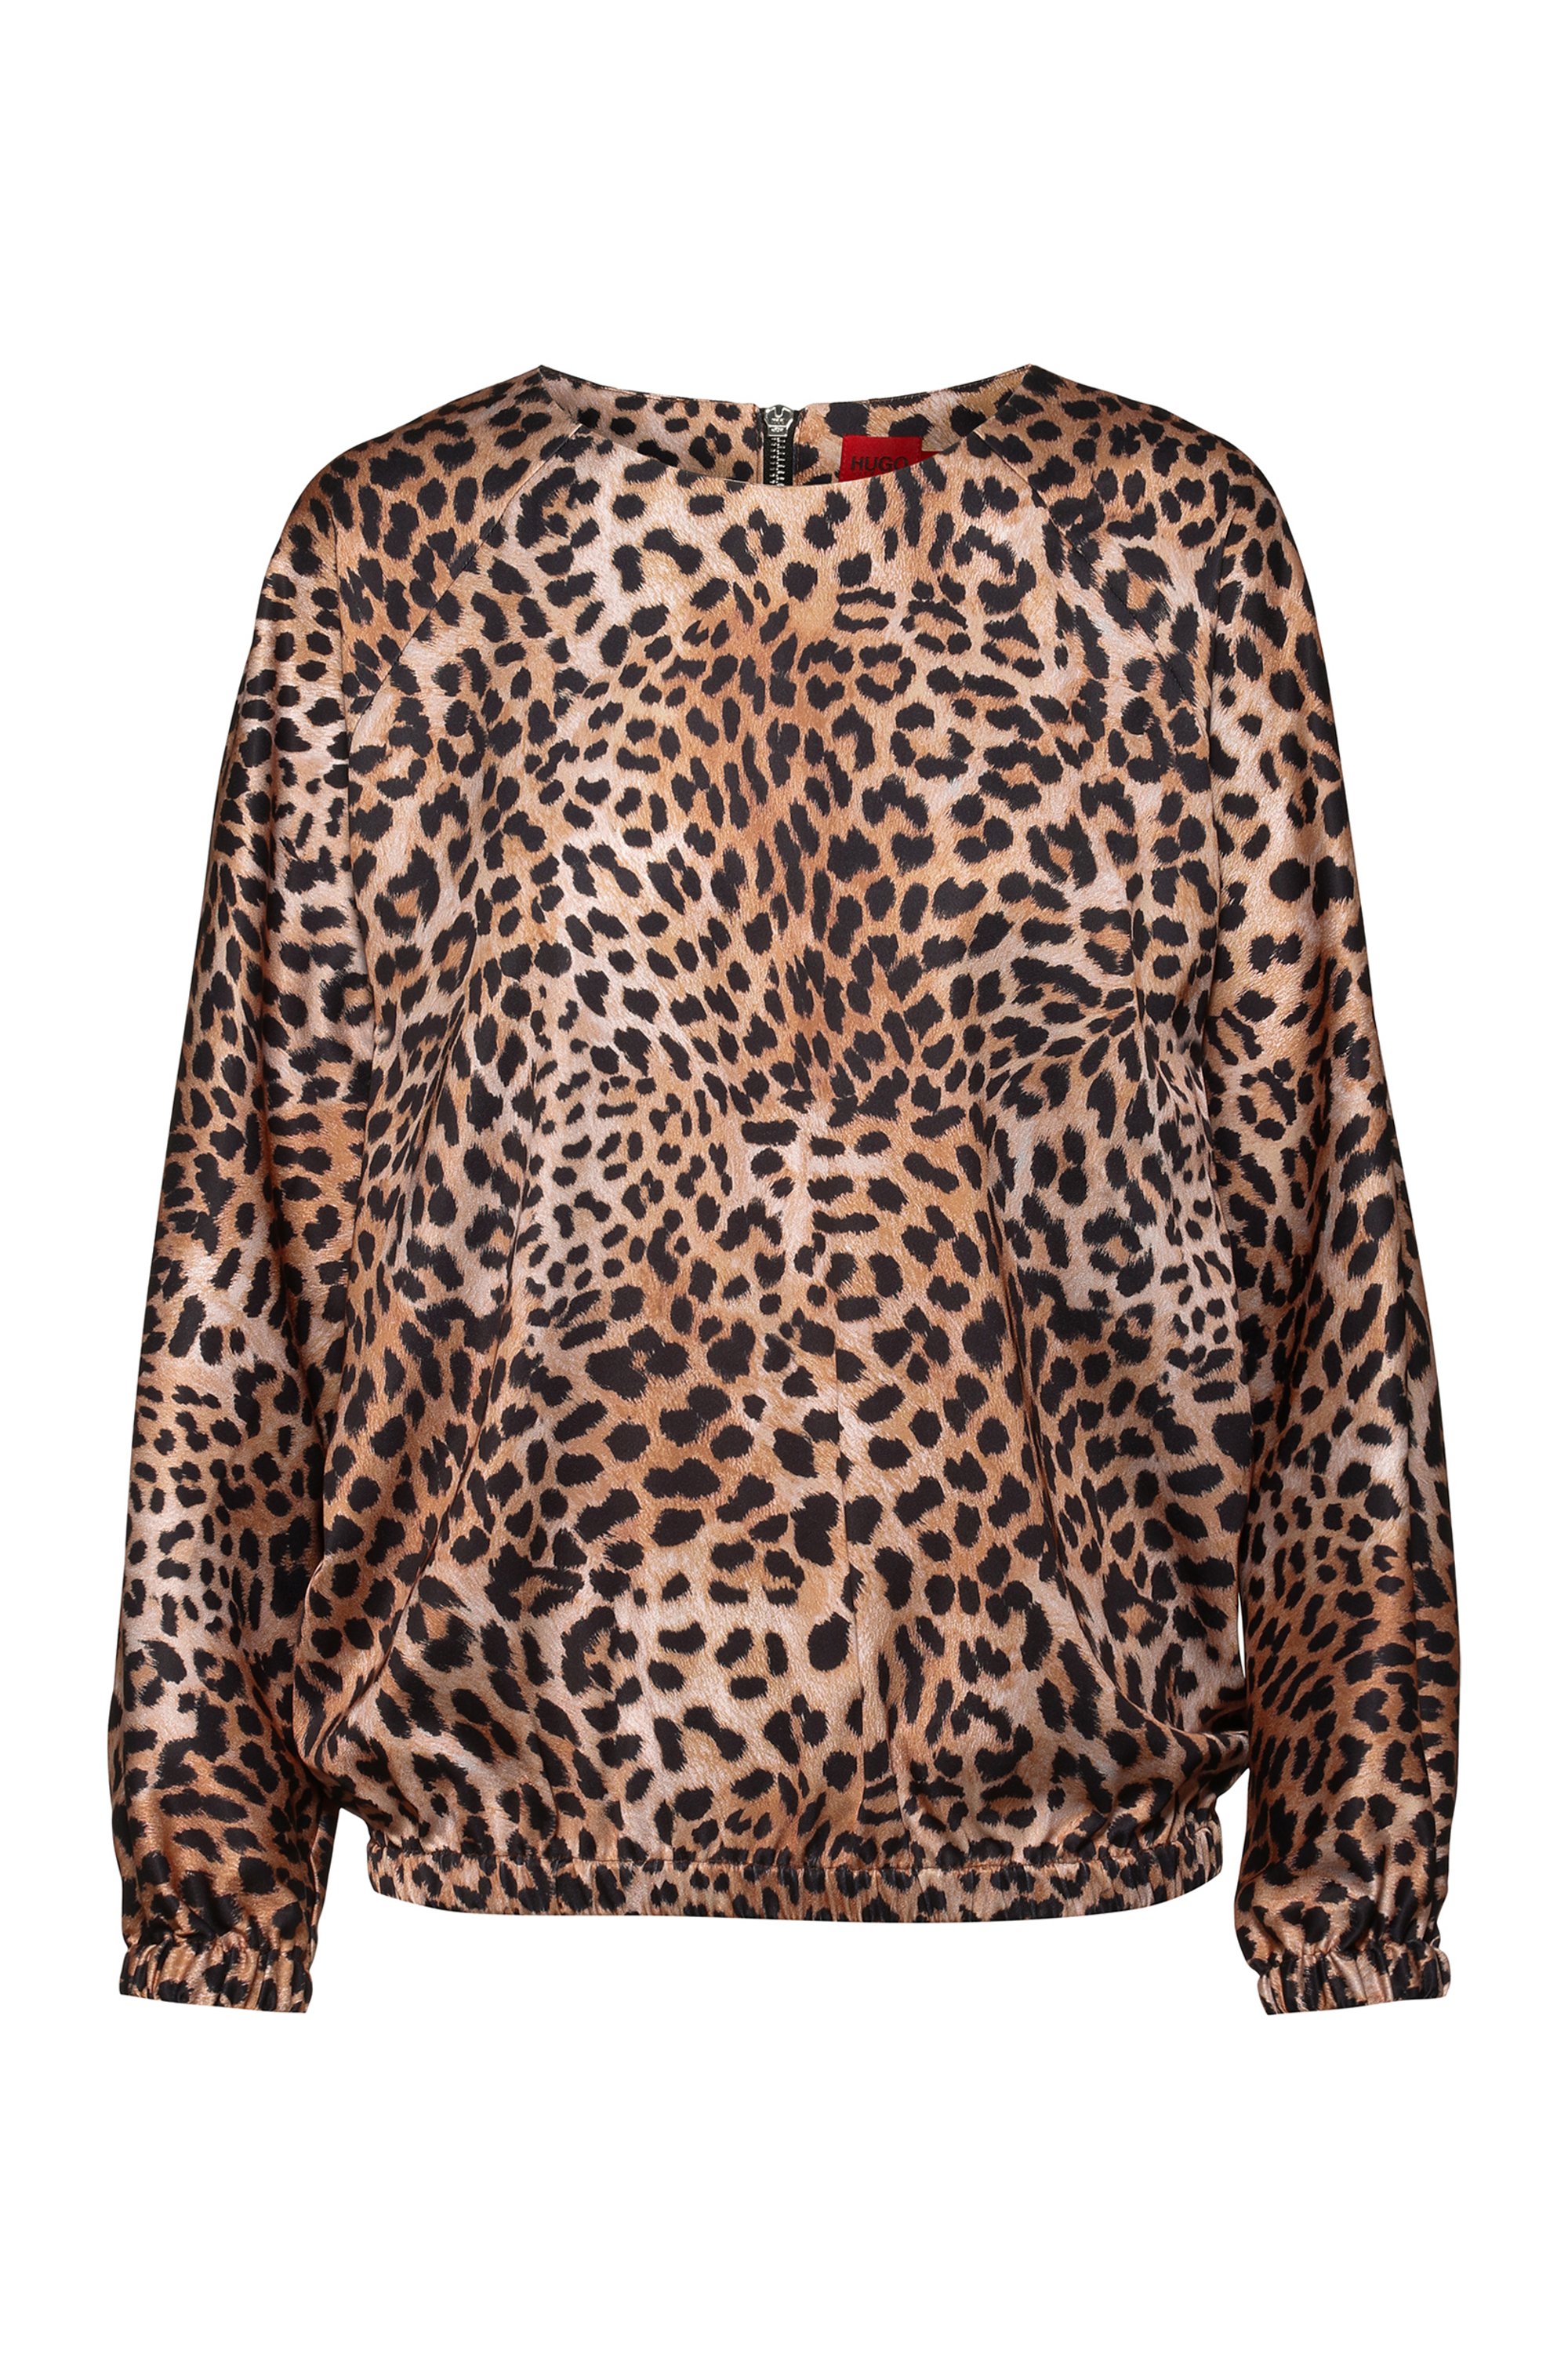 Relaxed-fit top in leopard-print satin, Patterned